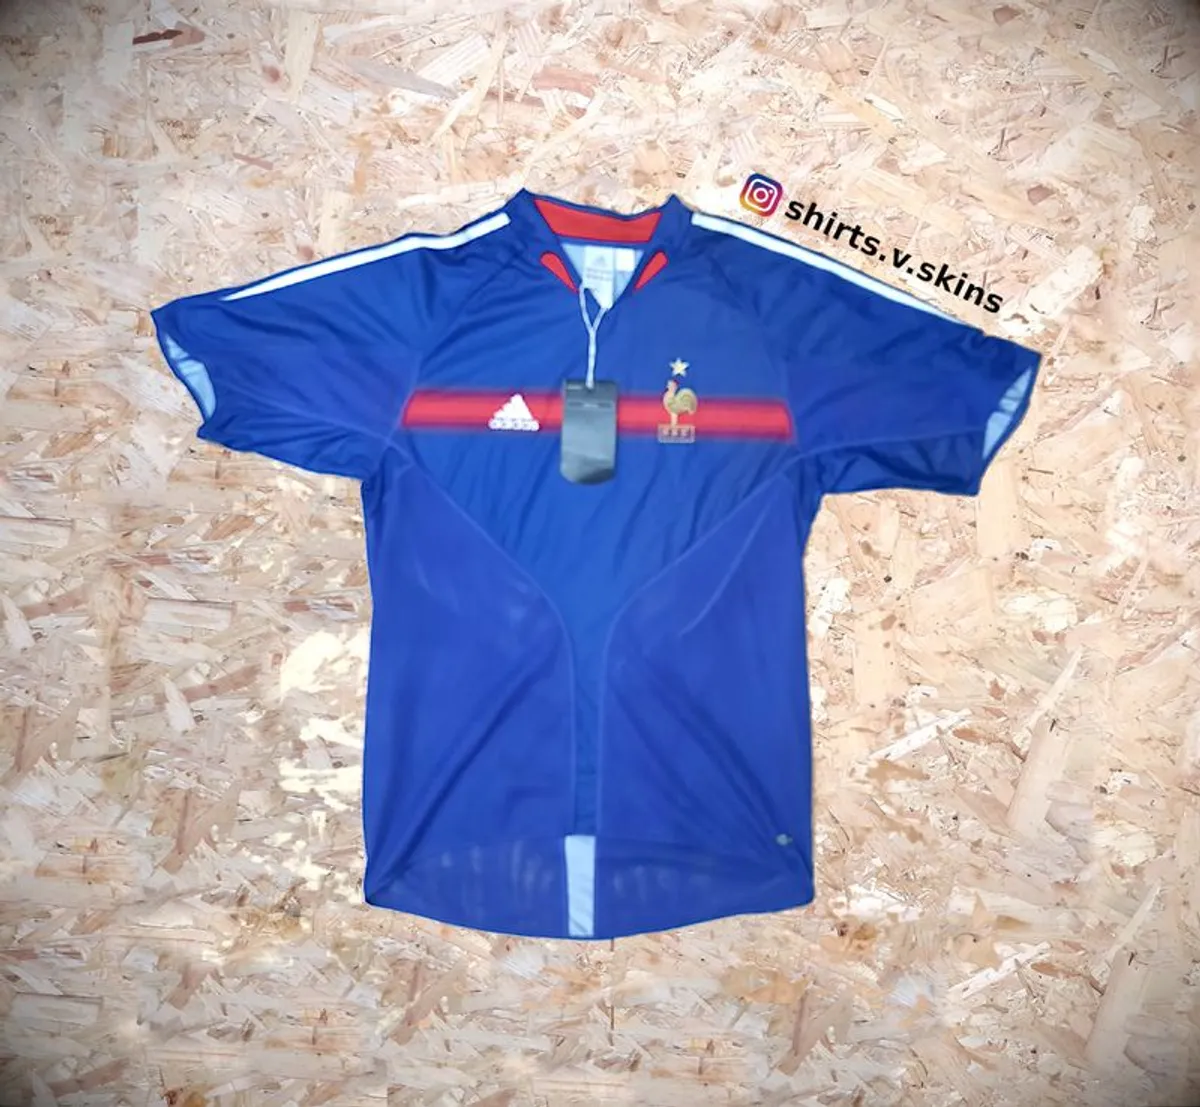 FREE POST Vintage France Jersey 2004 adidas shirt  BNWT Soccer Football Vintage Retro Blue Brand New With Tags